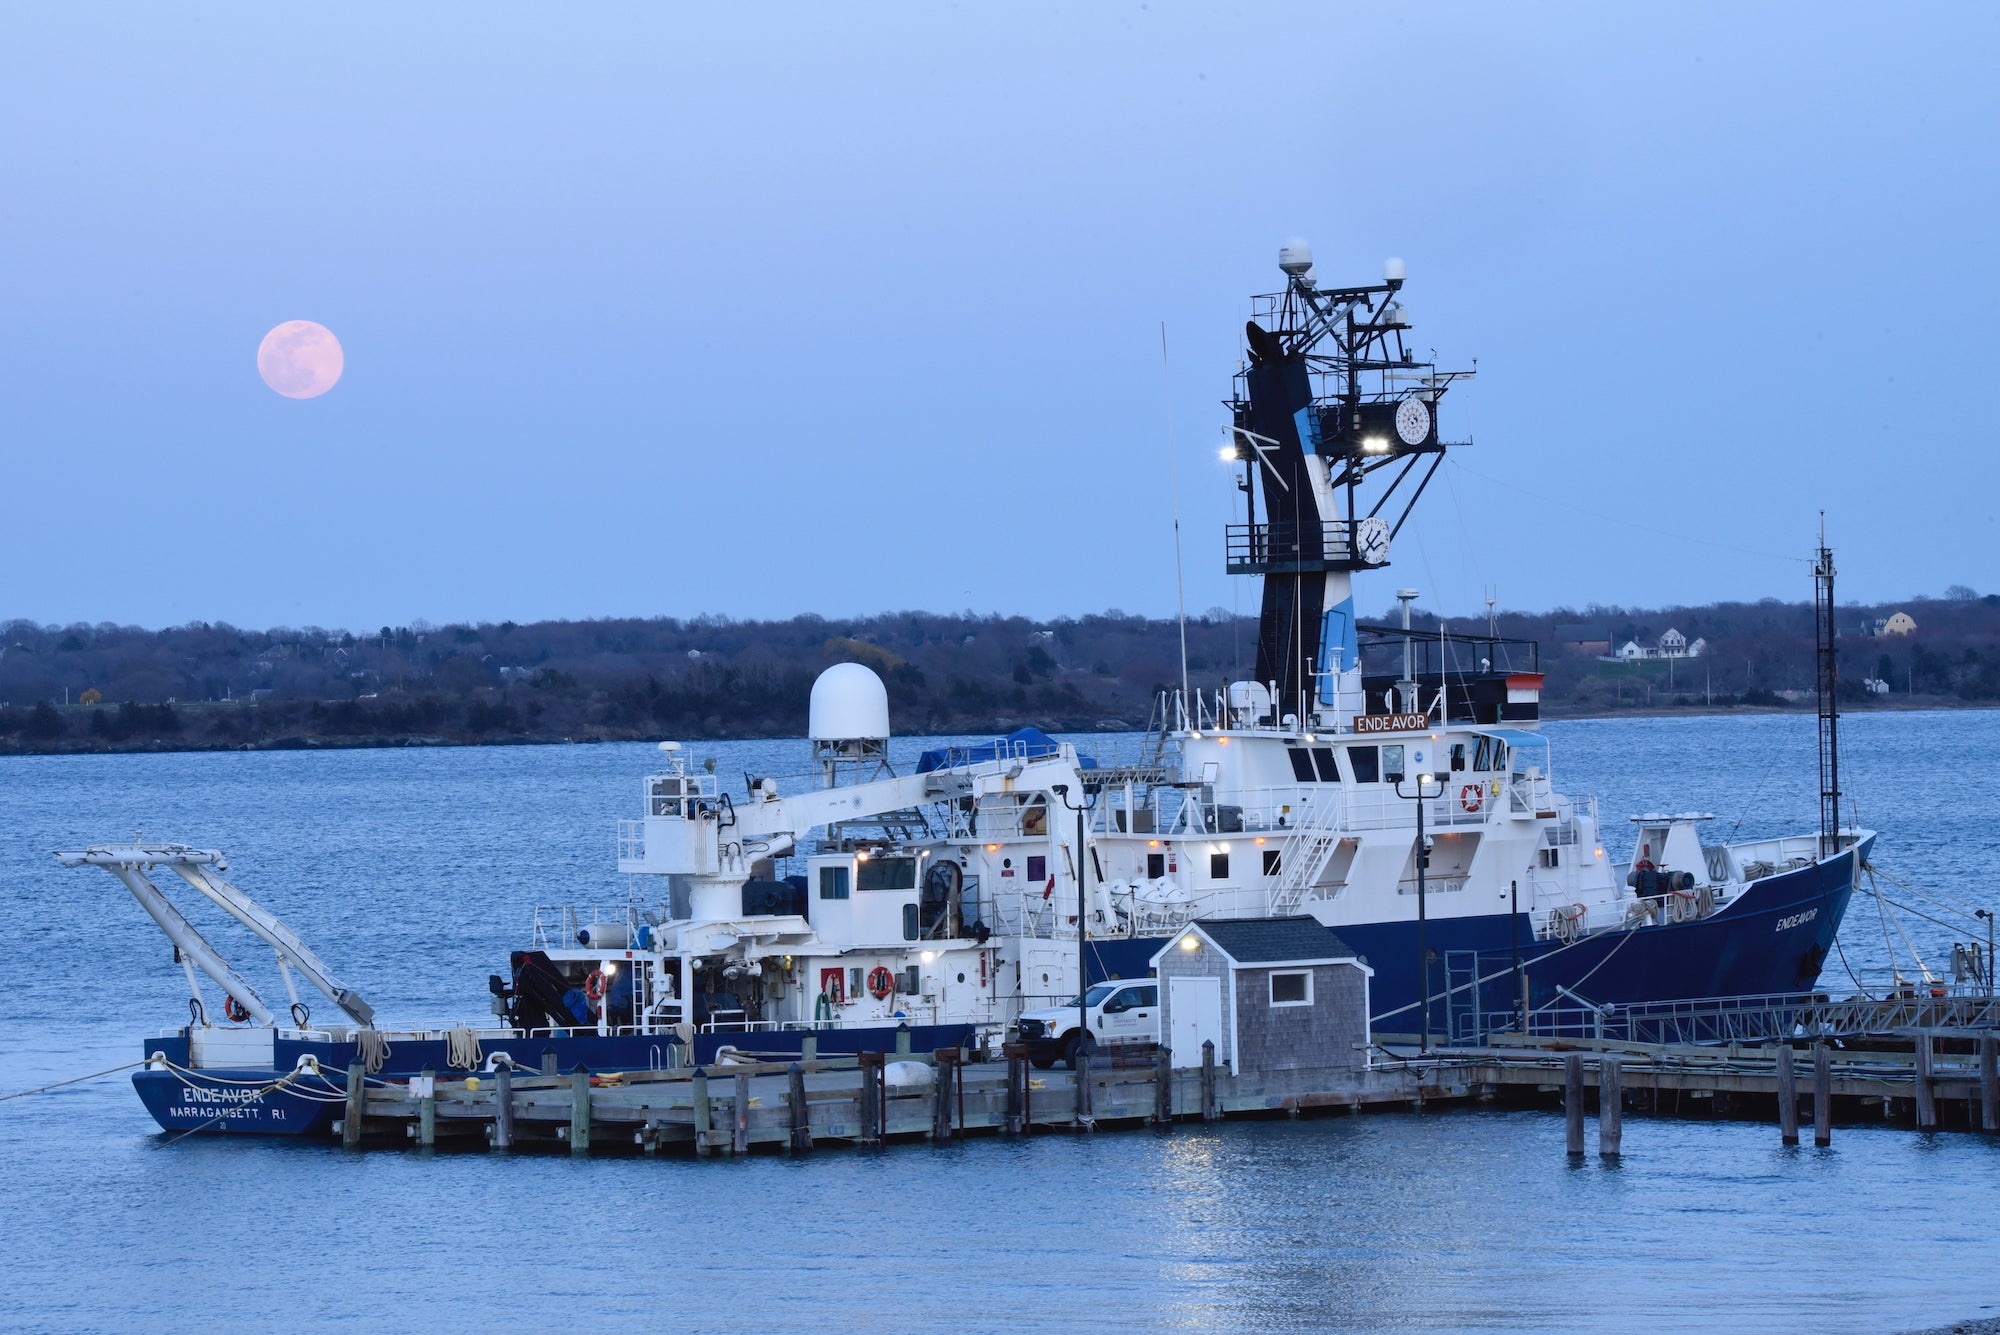 R/V Endeavor at the GSO dock during a pink supermoon.